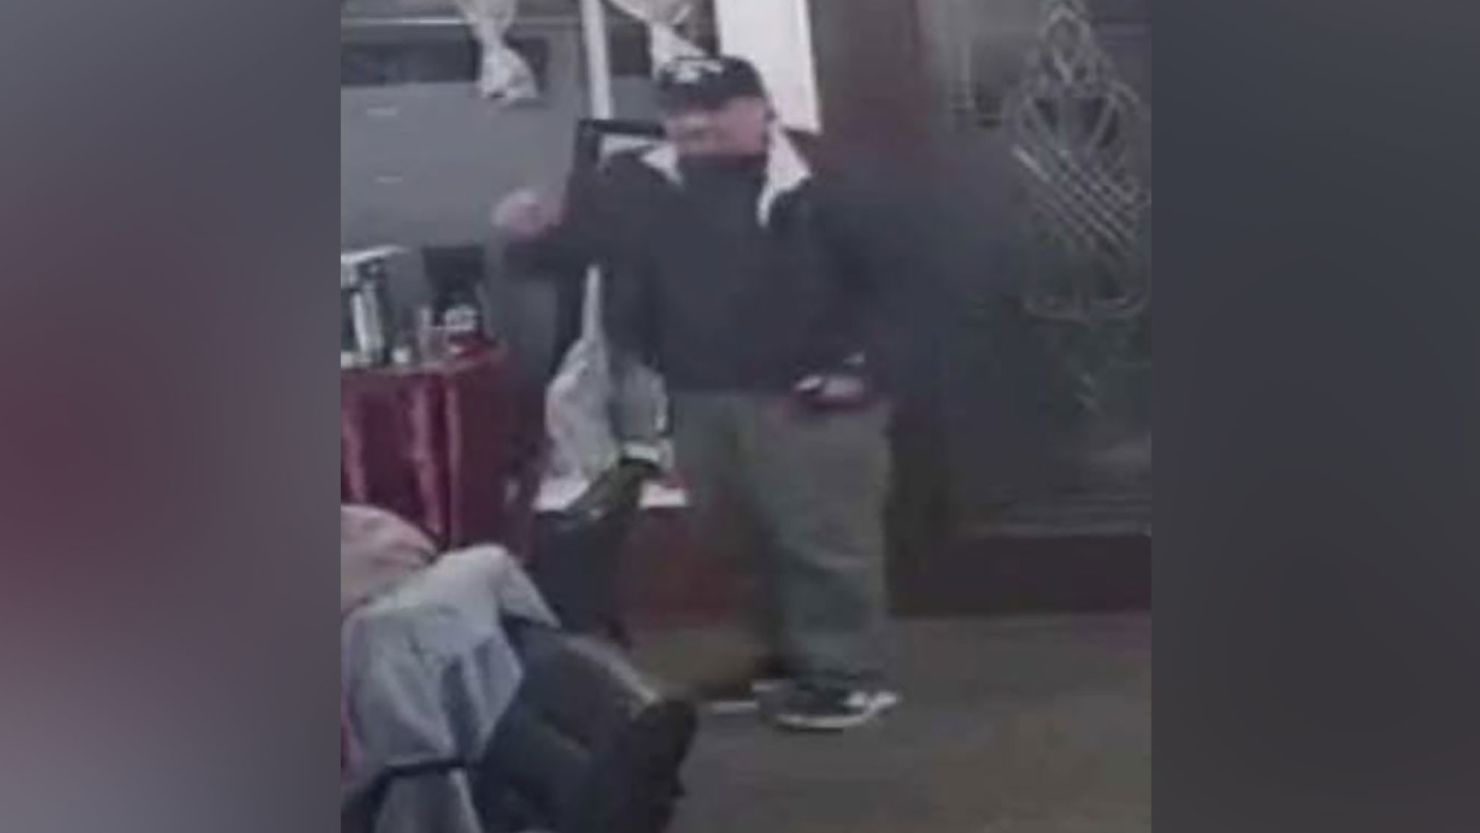 Investigators released this photo of a man sought in connection with the incident at a synagogue in San Francisco.